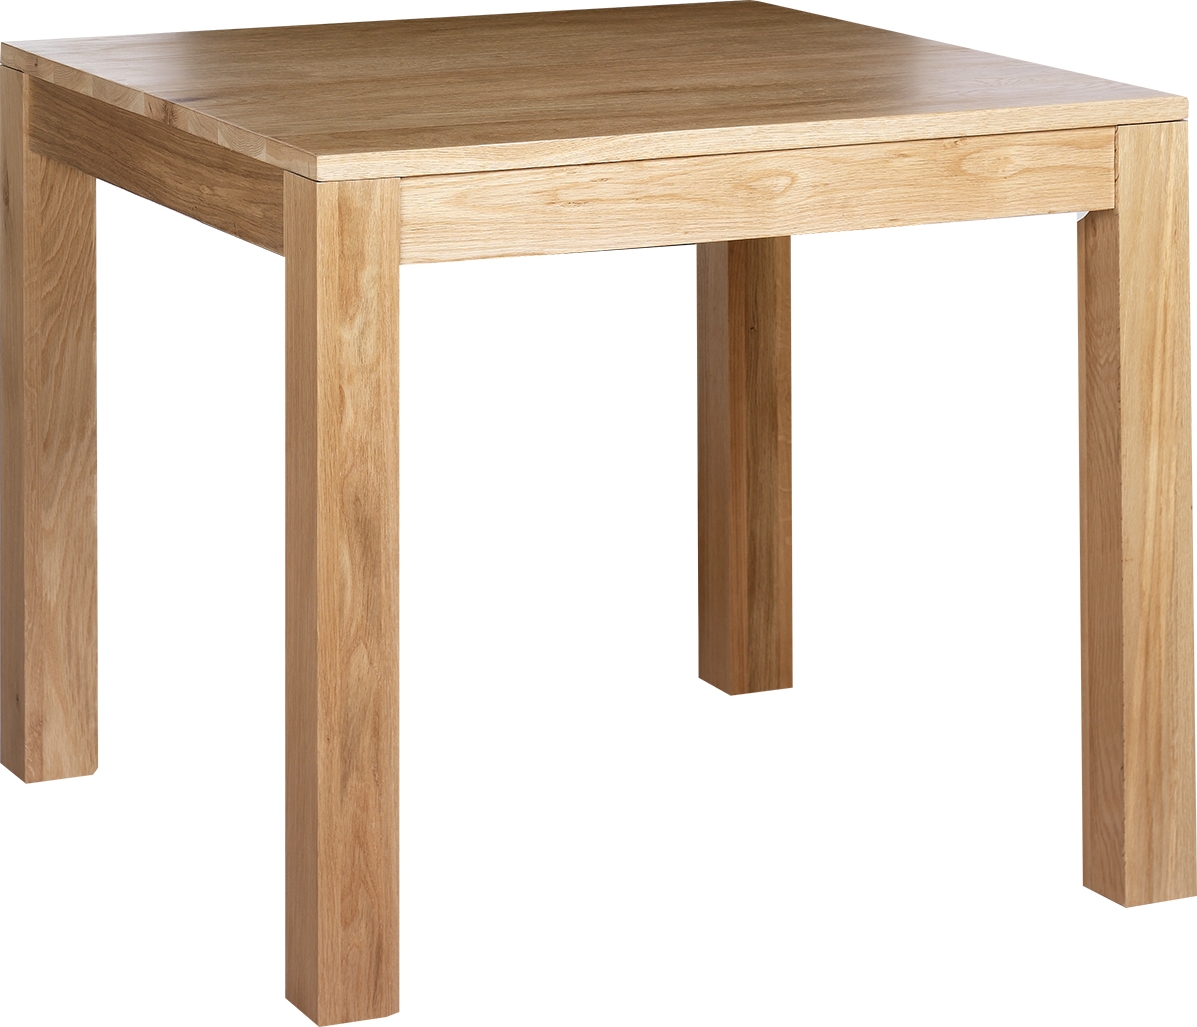 Cube Light Oak Dining Table 90cm Square Top Seats 4 Diners